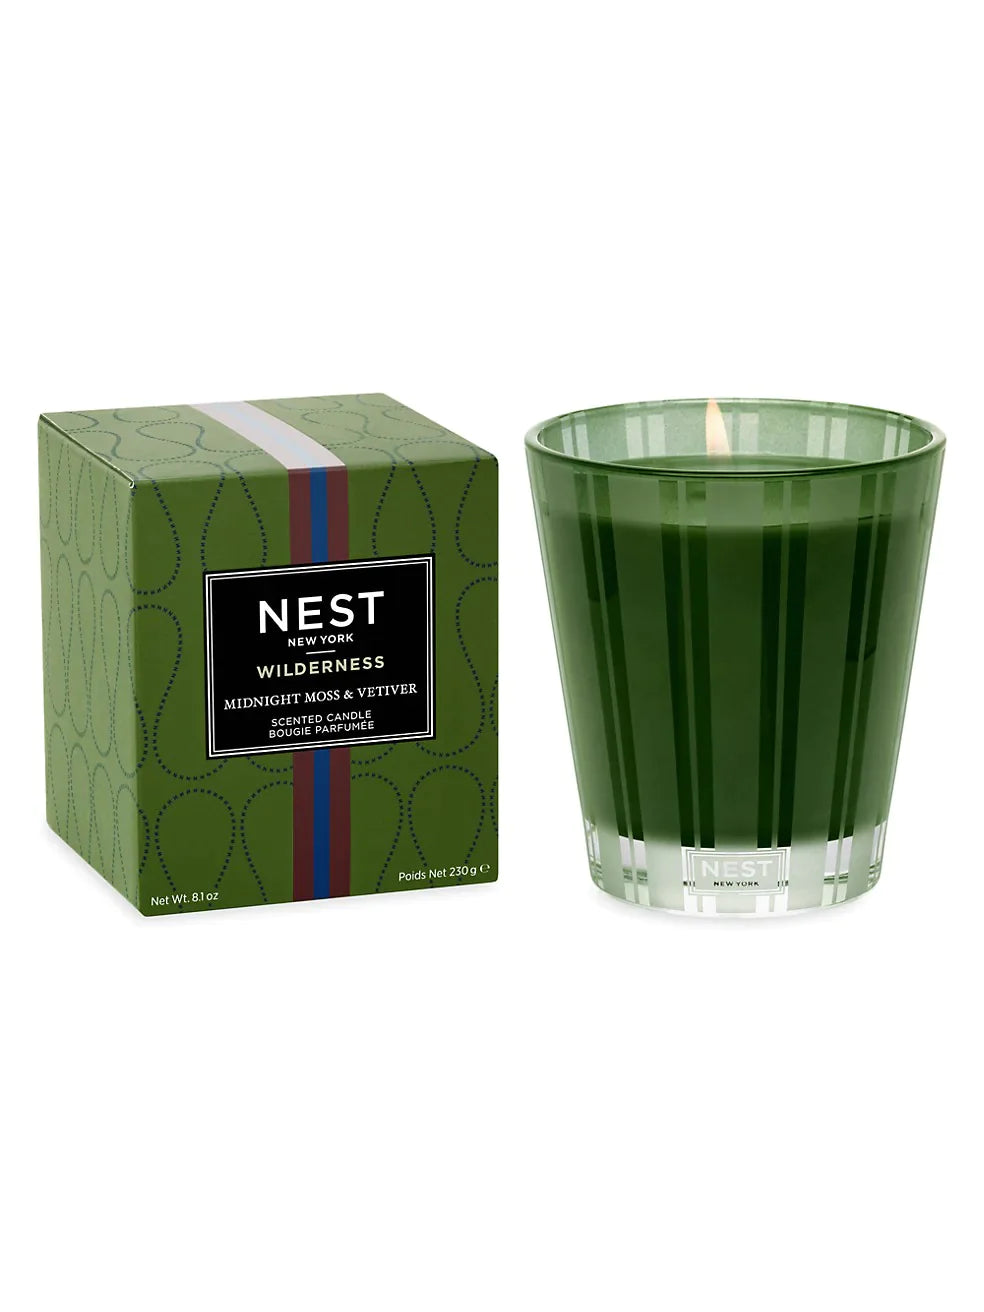 Midnight Moss and Vetiver Classic Candle